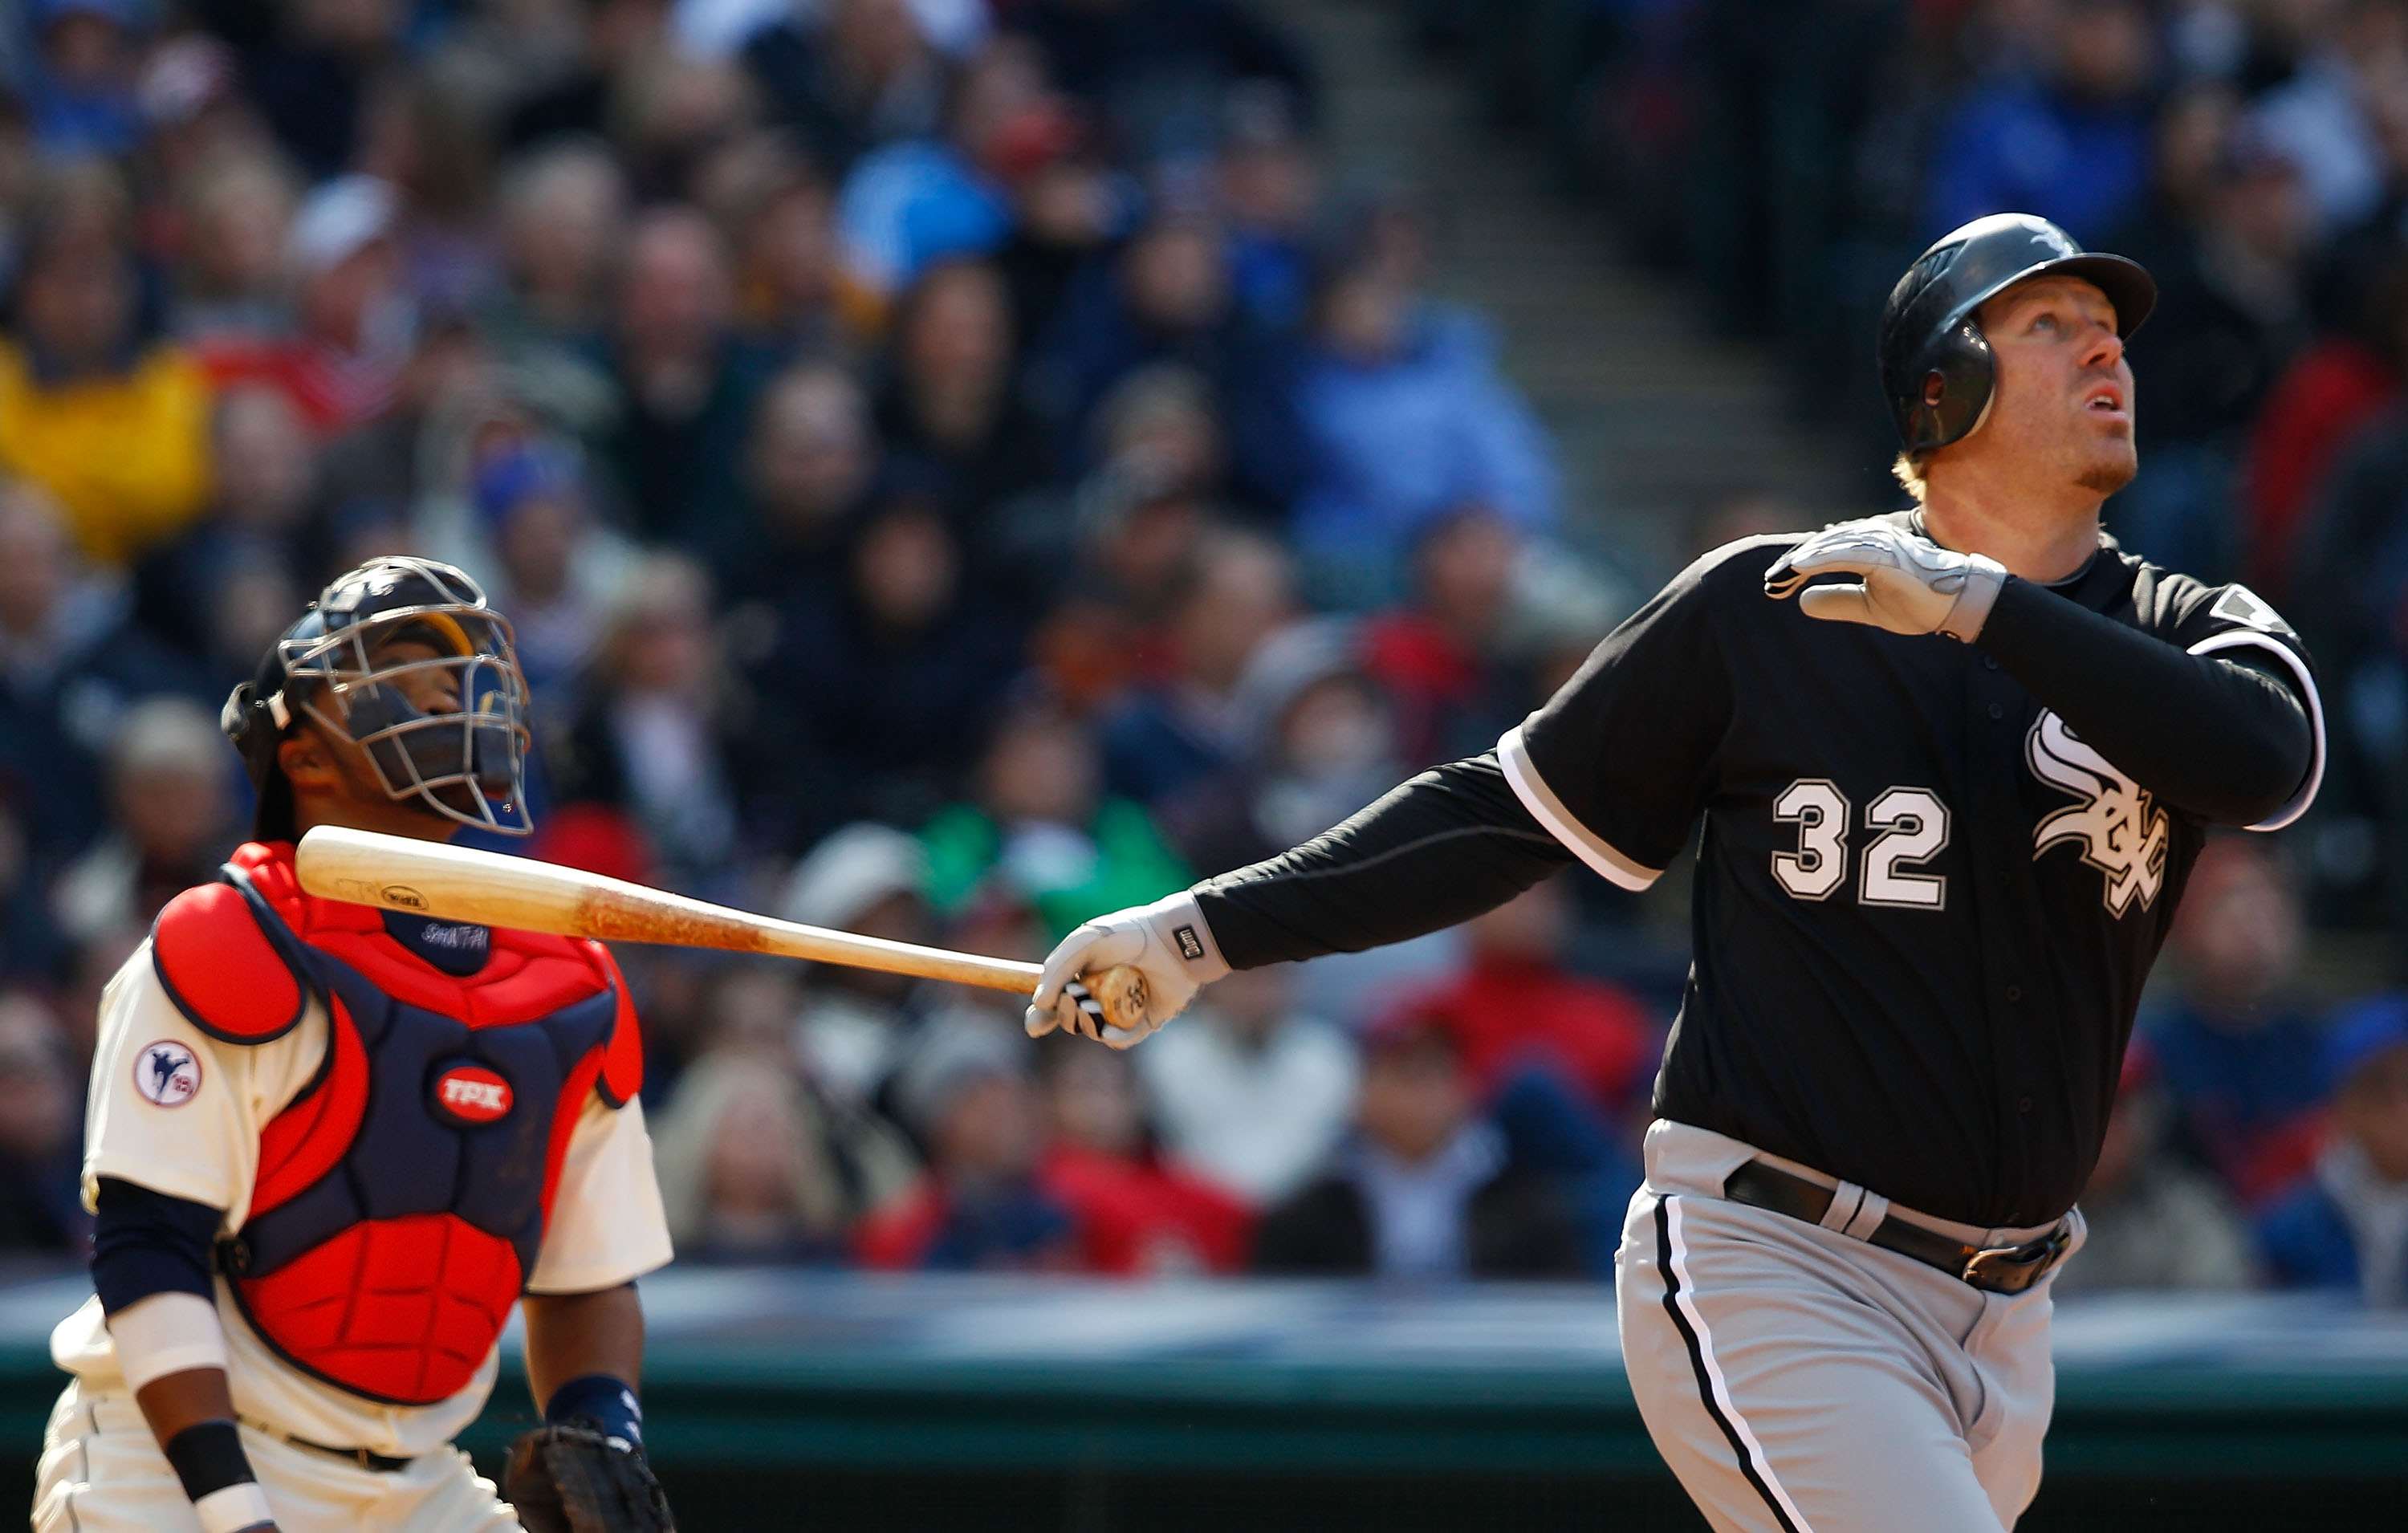 CLEVELAND - APRIL 01:  Adam Dunn #32 of the Chicago White Sox hits a two-run home run agains the Cleveland Indians during the Opening Day game on April 1, 2011 at Progressive Field in Cleveland, Ohio.  (Photo by Jared Wickerham/Getty Images)